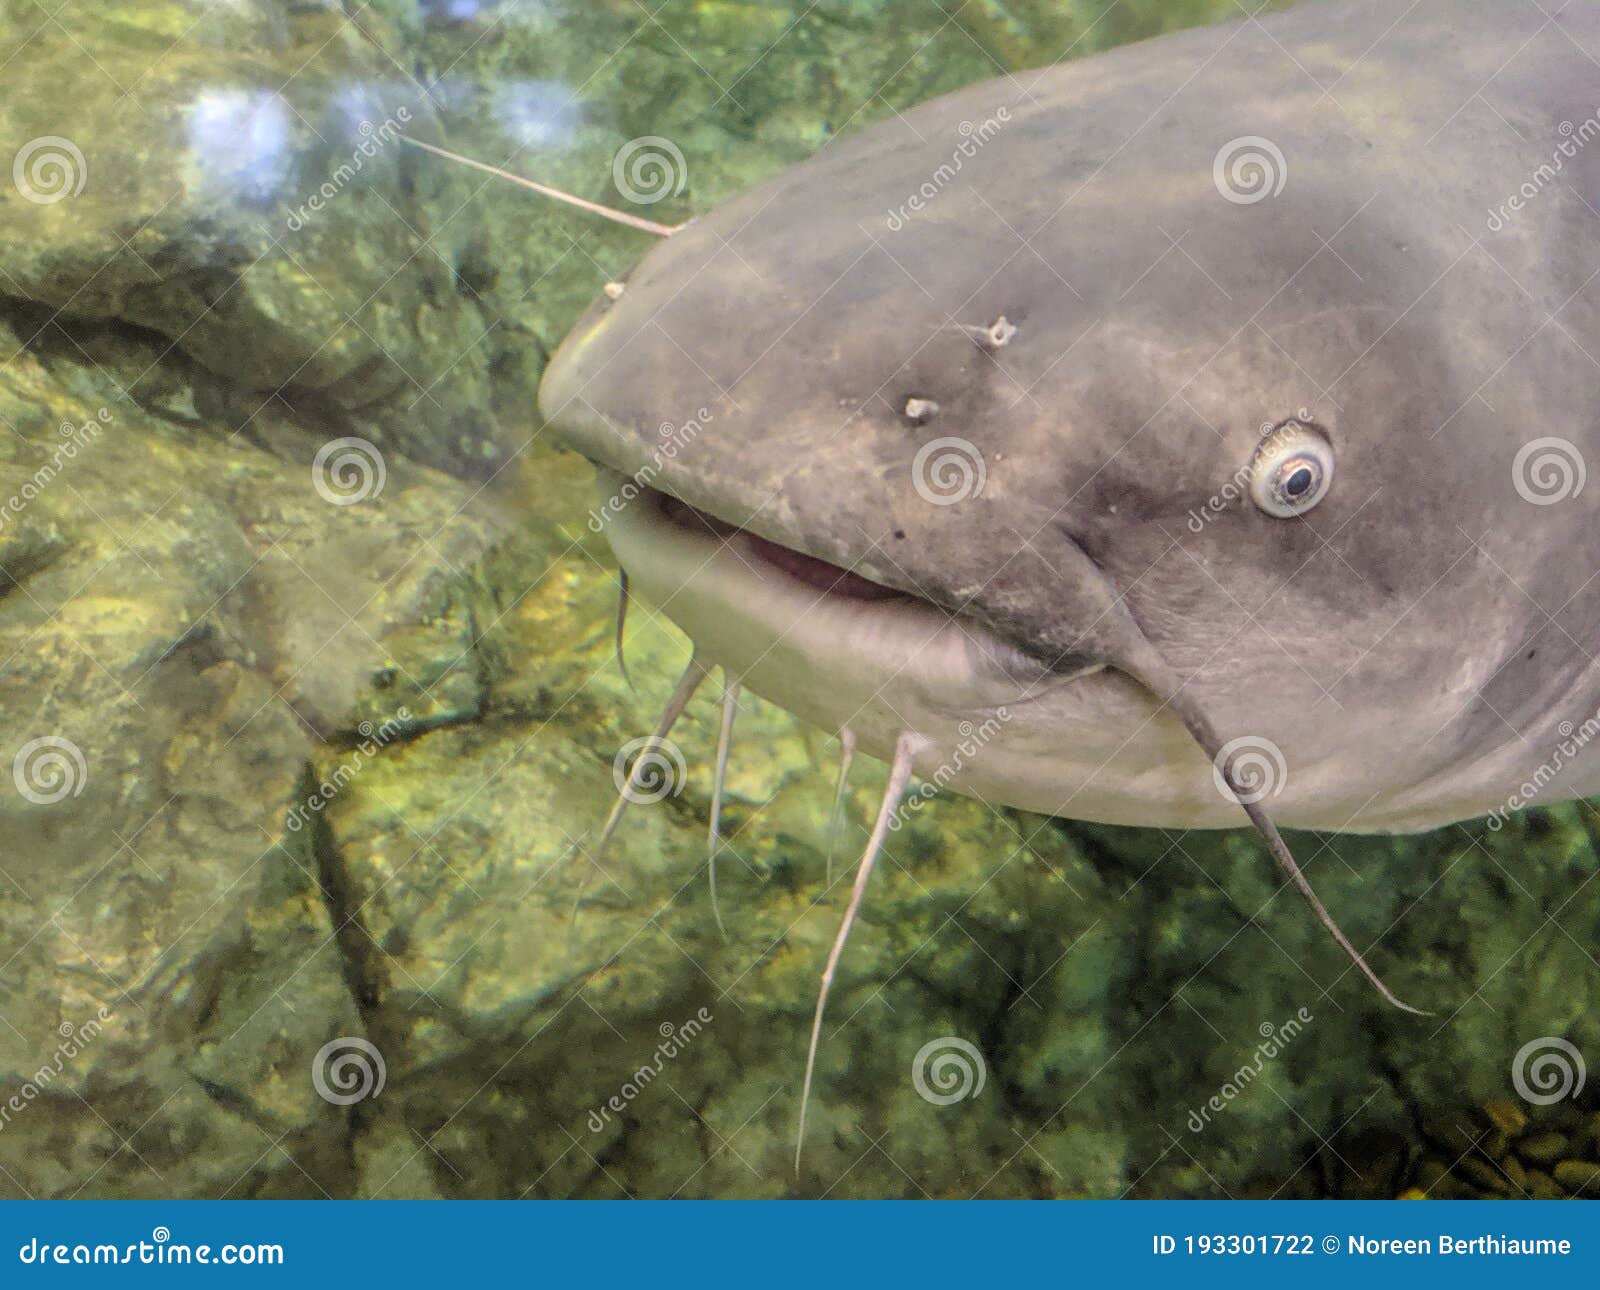 Catfish Big Eye Staring with Whiskers Stock Photo - Image of staring,  whiskers: 193301722